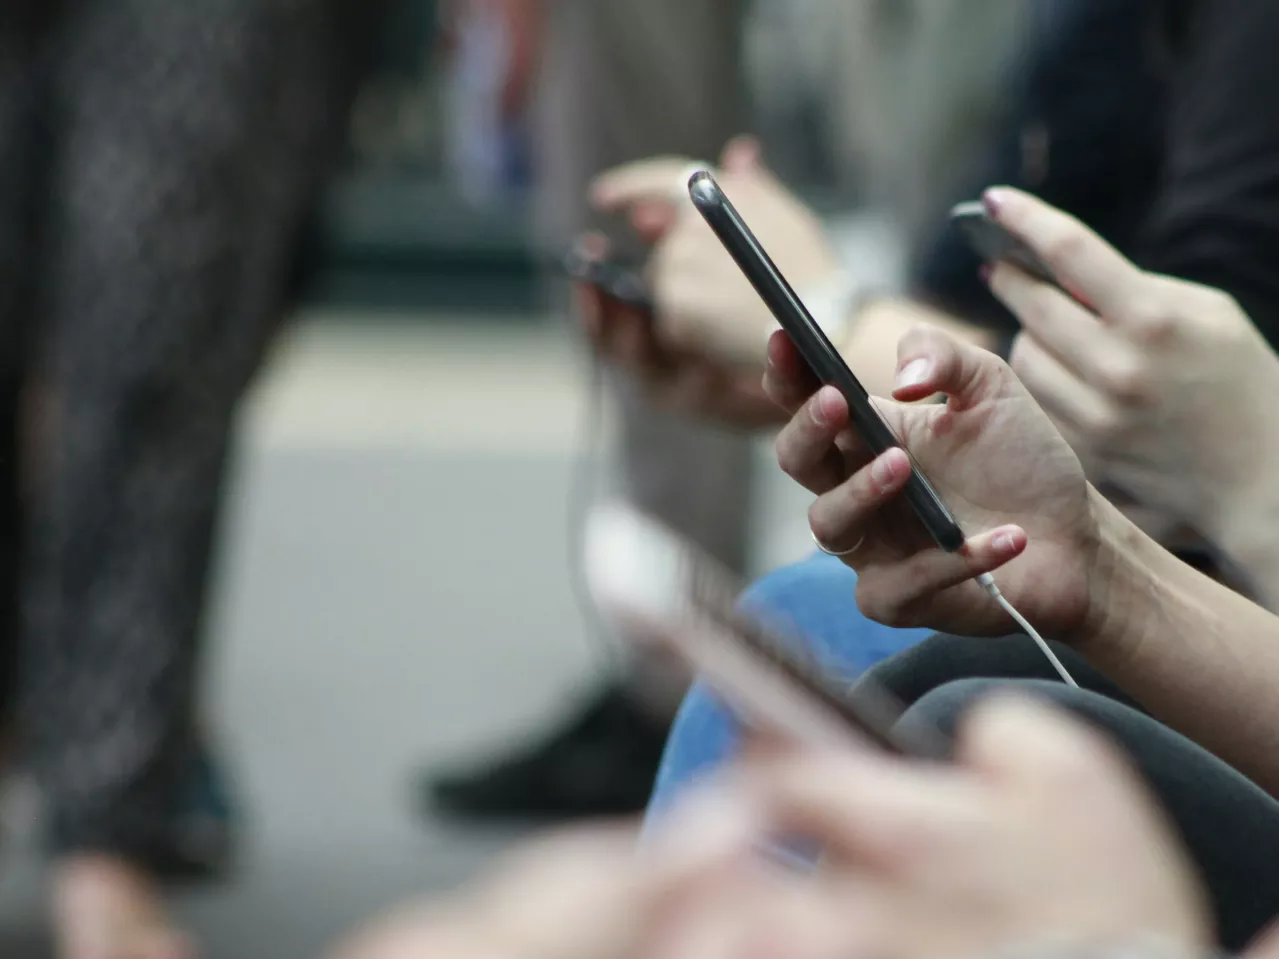 Close-up of a person's hand holding a smartphone connected to earphones, among other commuters, subtly emphasizing modern connectivity and personal space in public.